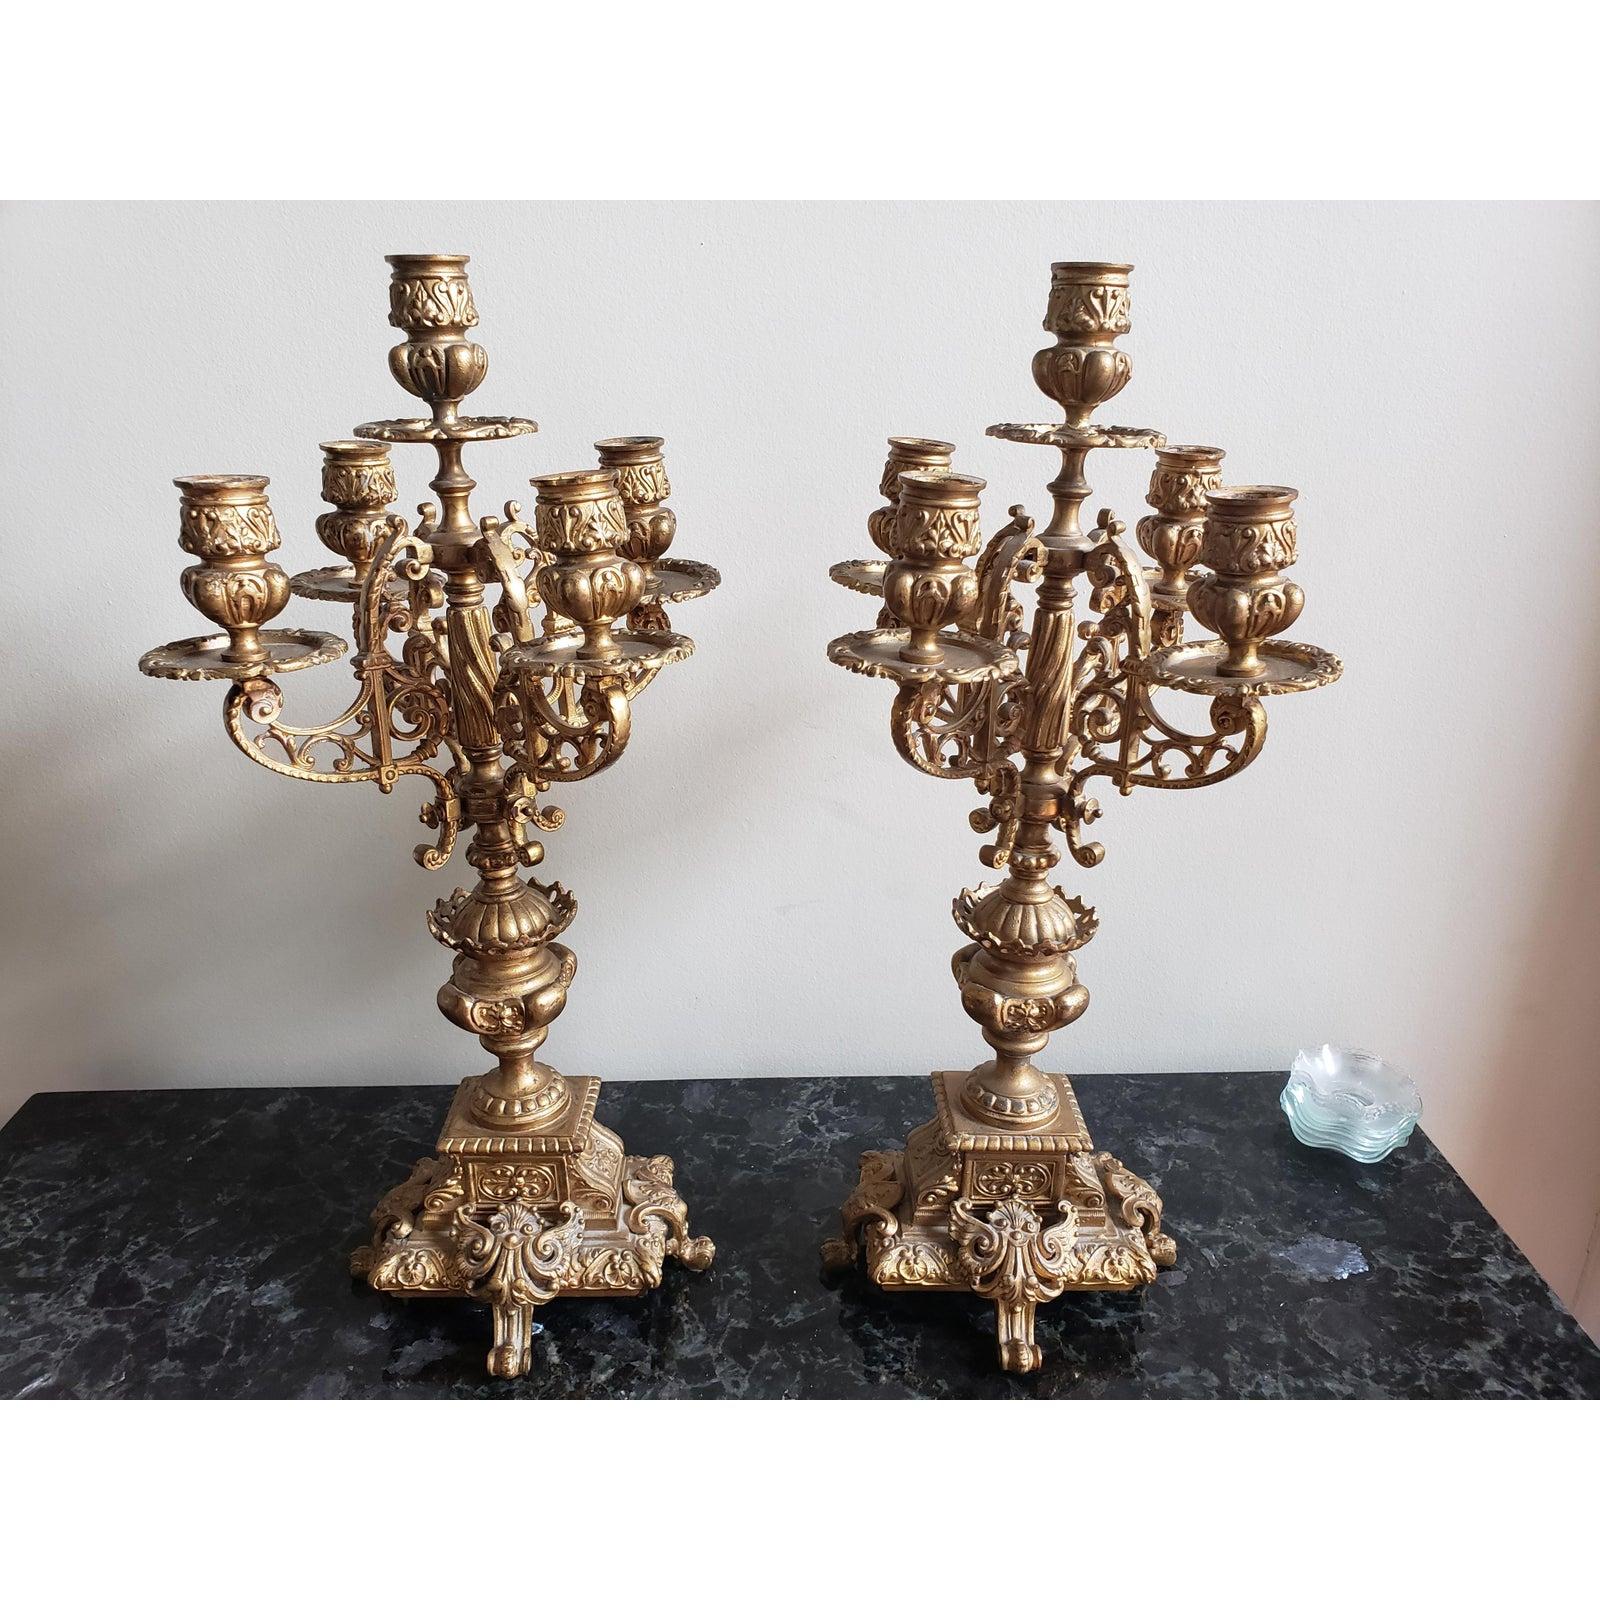 1930s Italian Rococo 5 Arm Gilted Bronze Candelabras, a Pair For Sale 1